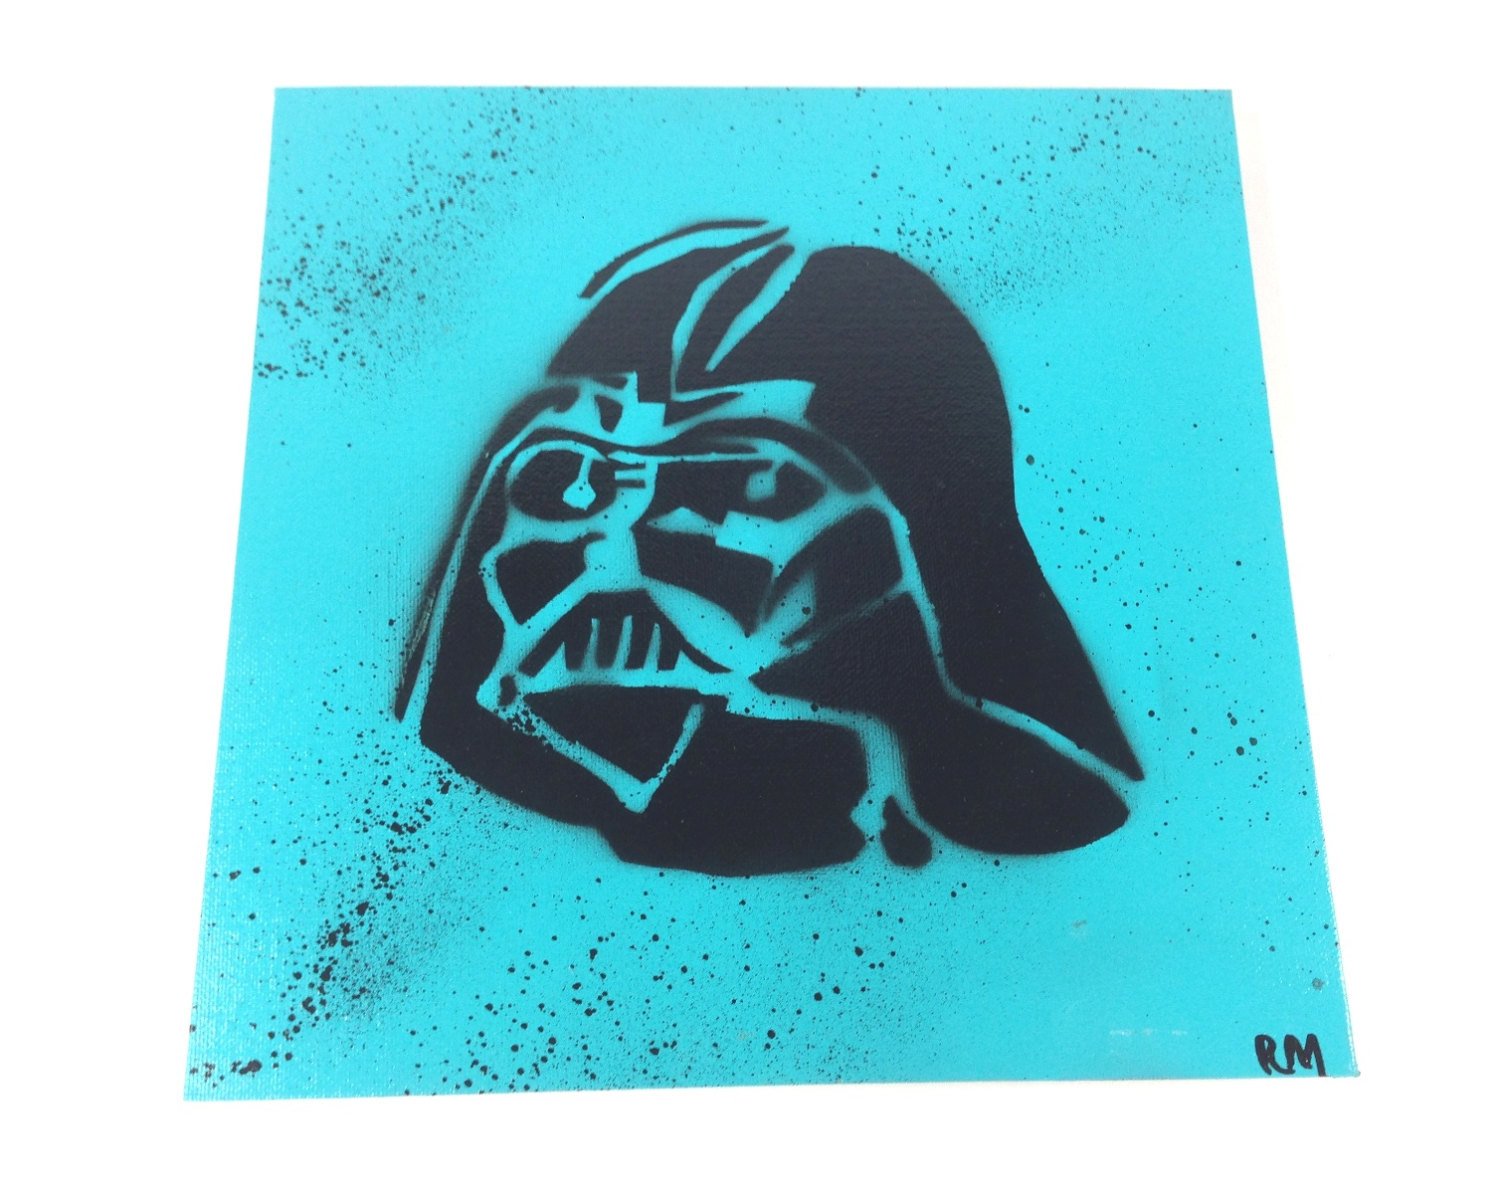 Spray Paint Stencil Art on Canvas Covered Board by